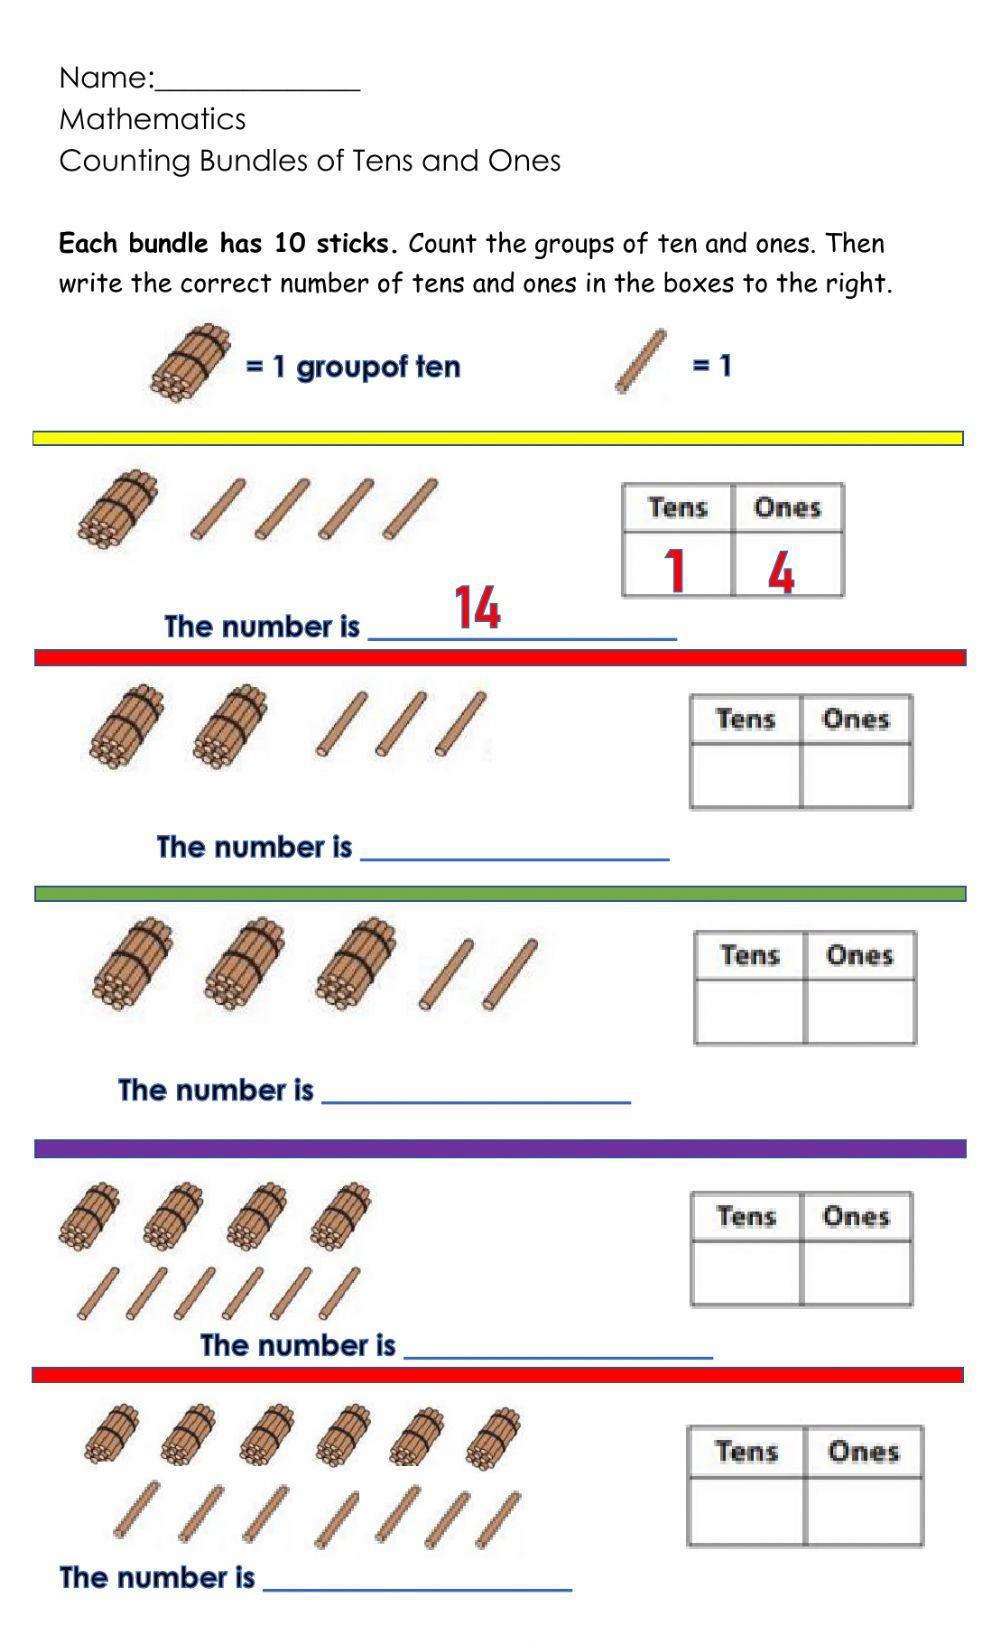 Counting groups of Tens and Ones